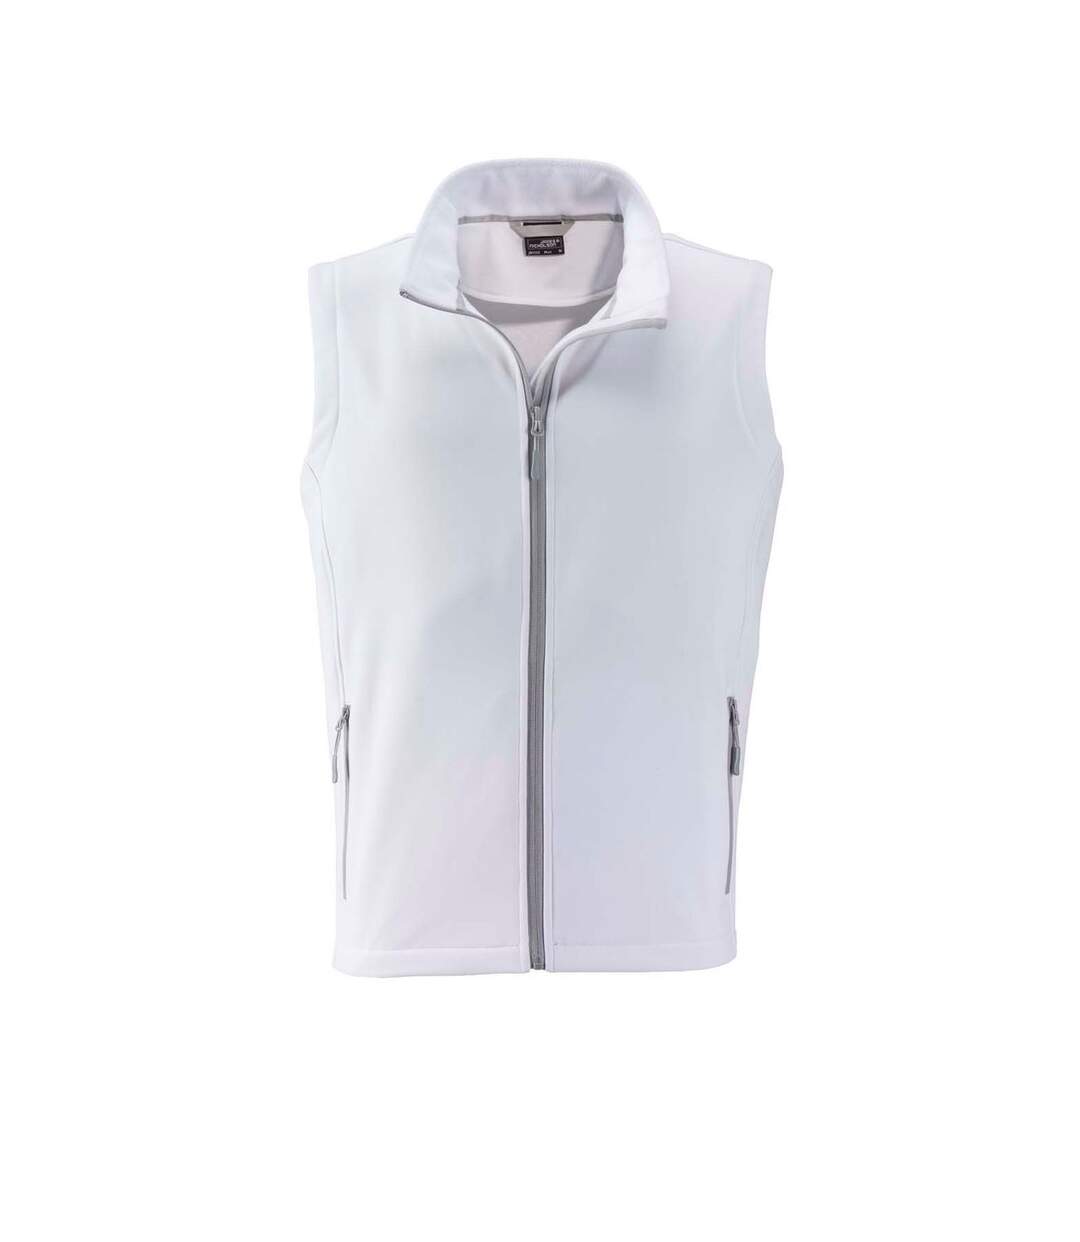 Gilet sans manches micropolaire softshell - JN1128 - blanc - Homme